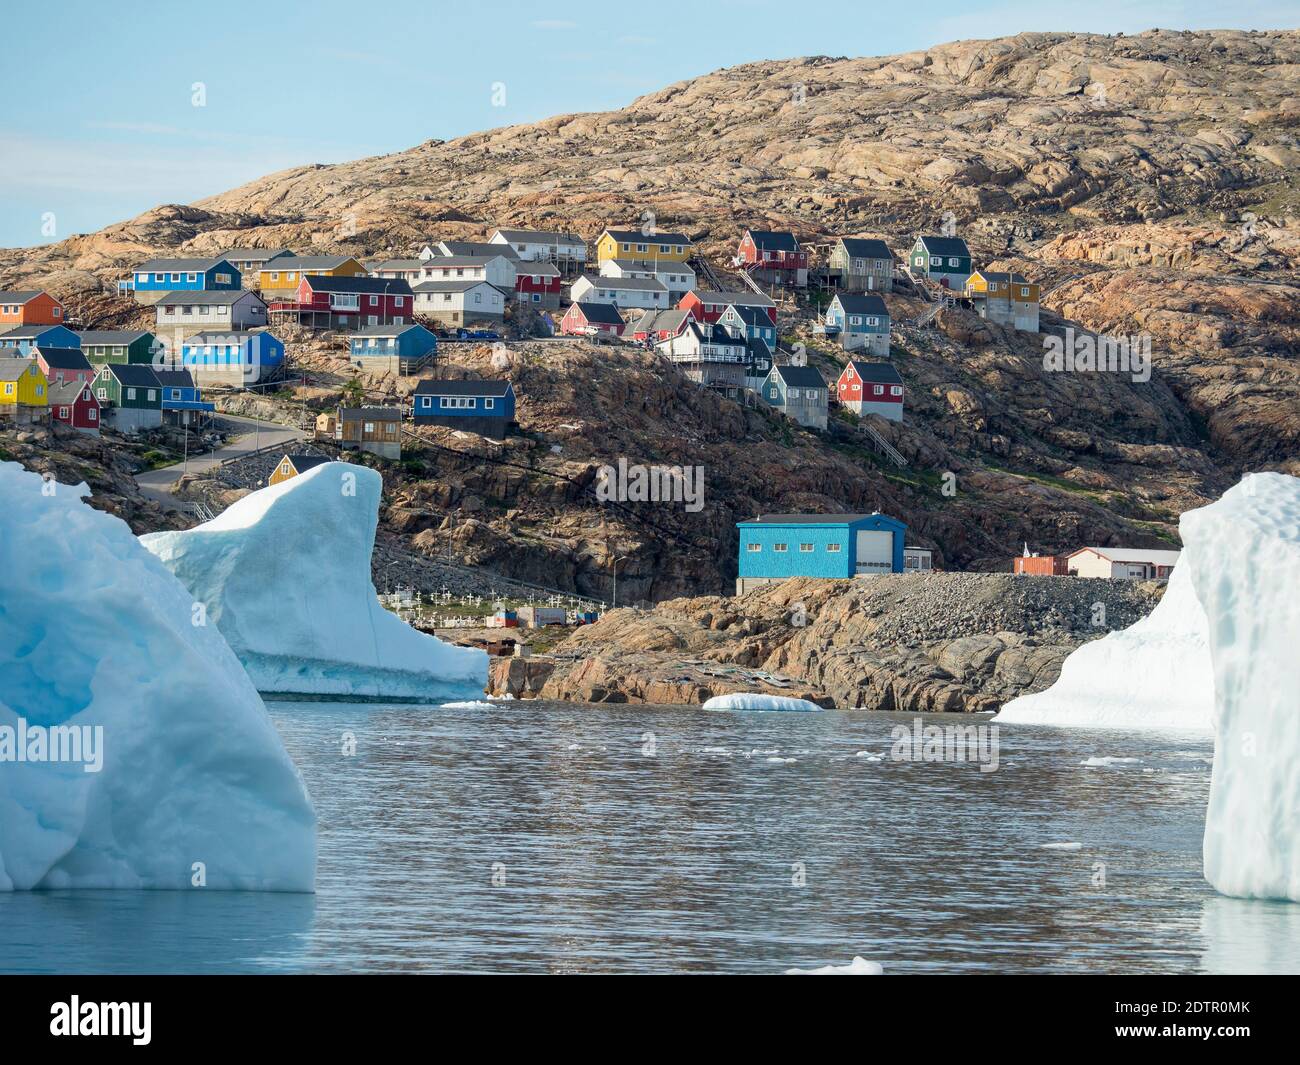 The town Uummannaq in the north of West Greenland, located on an island  in the Uummannaq Fjord System. America, North America, Greenland Stock Photo